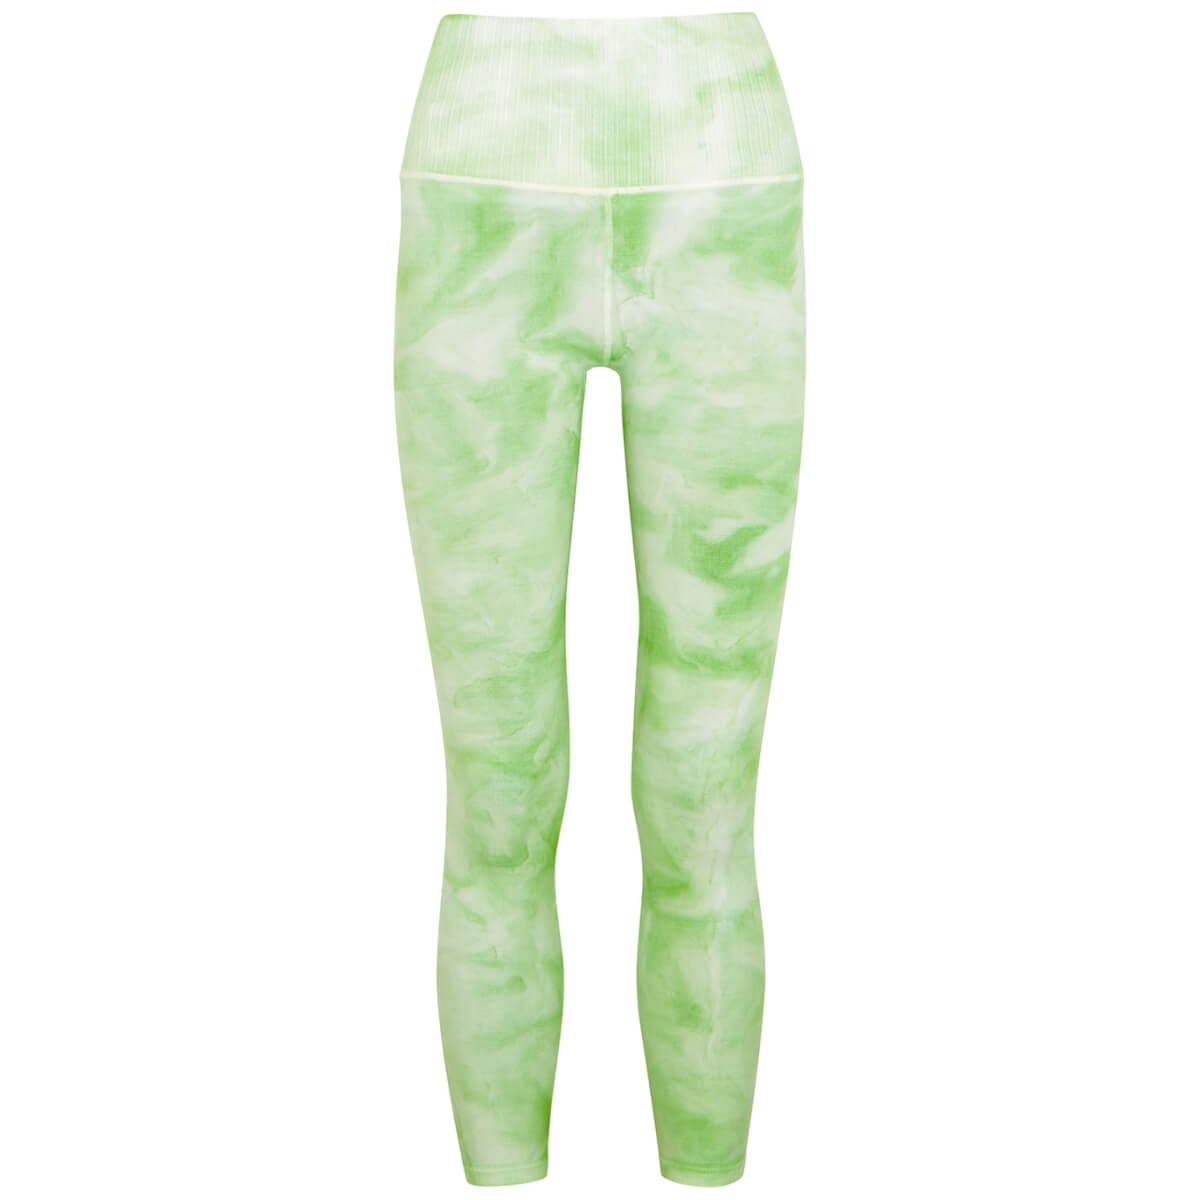 Free People Movement Good Karma Tie-dyed Stretch-jersey Leggings - Green - XS/S